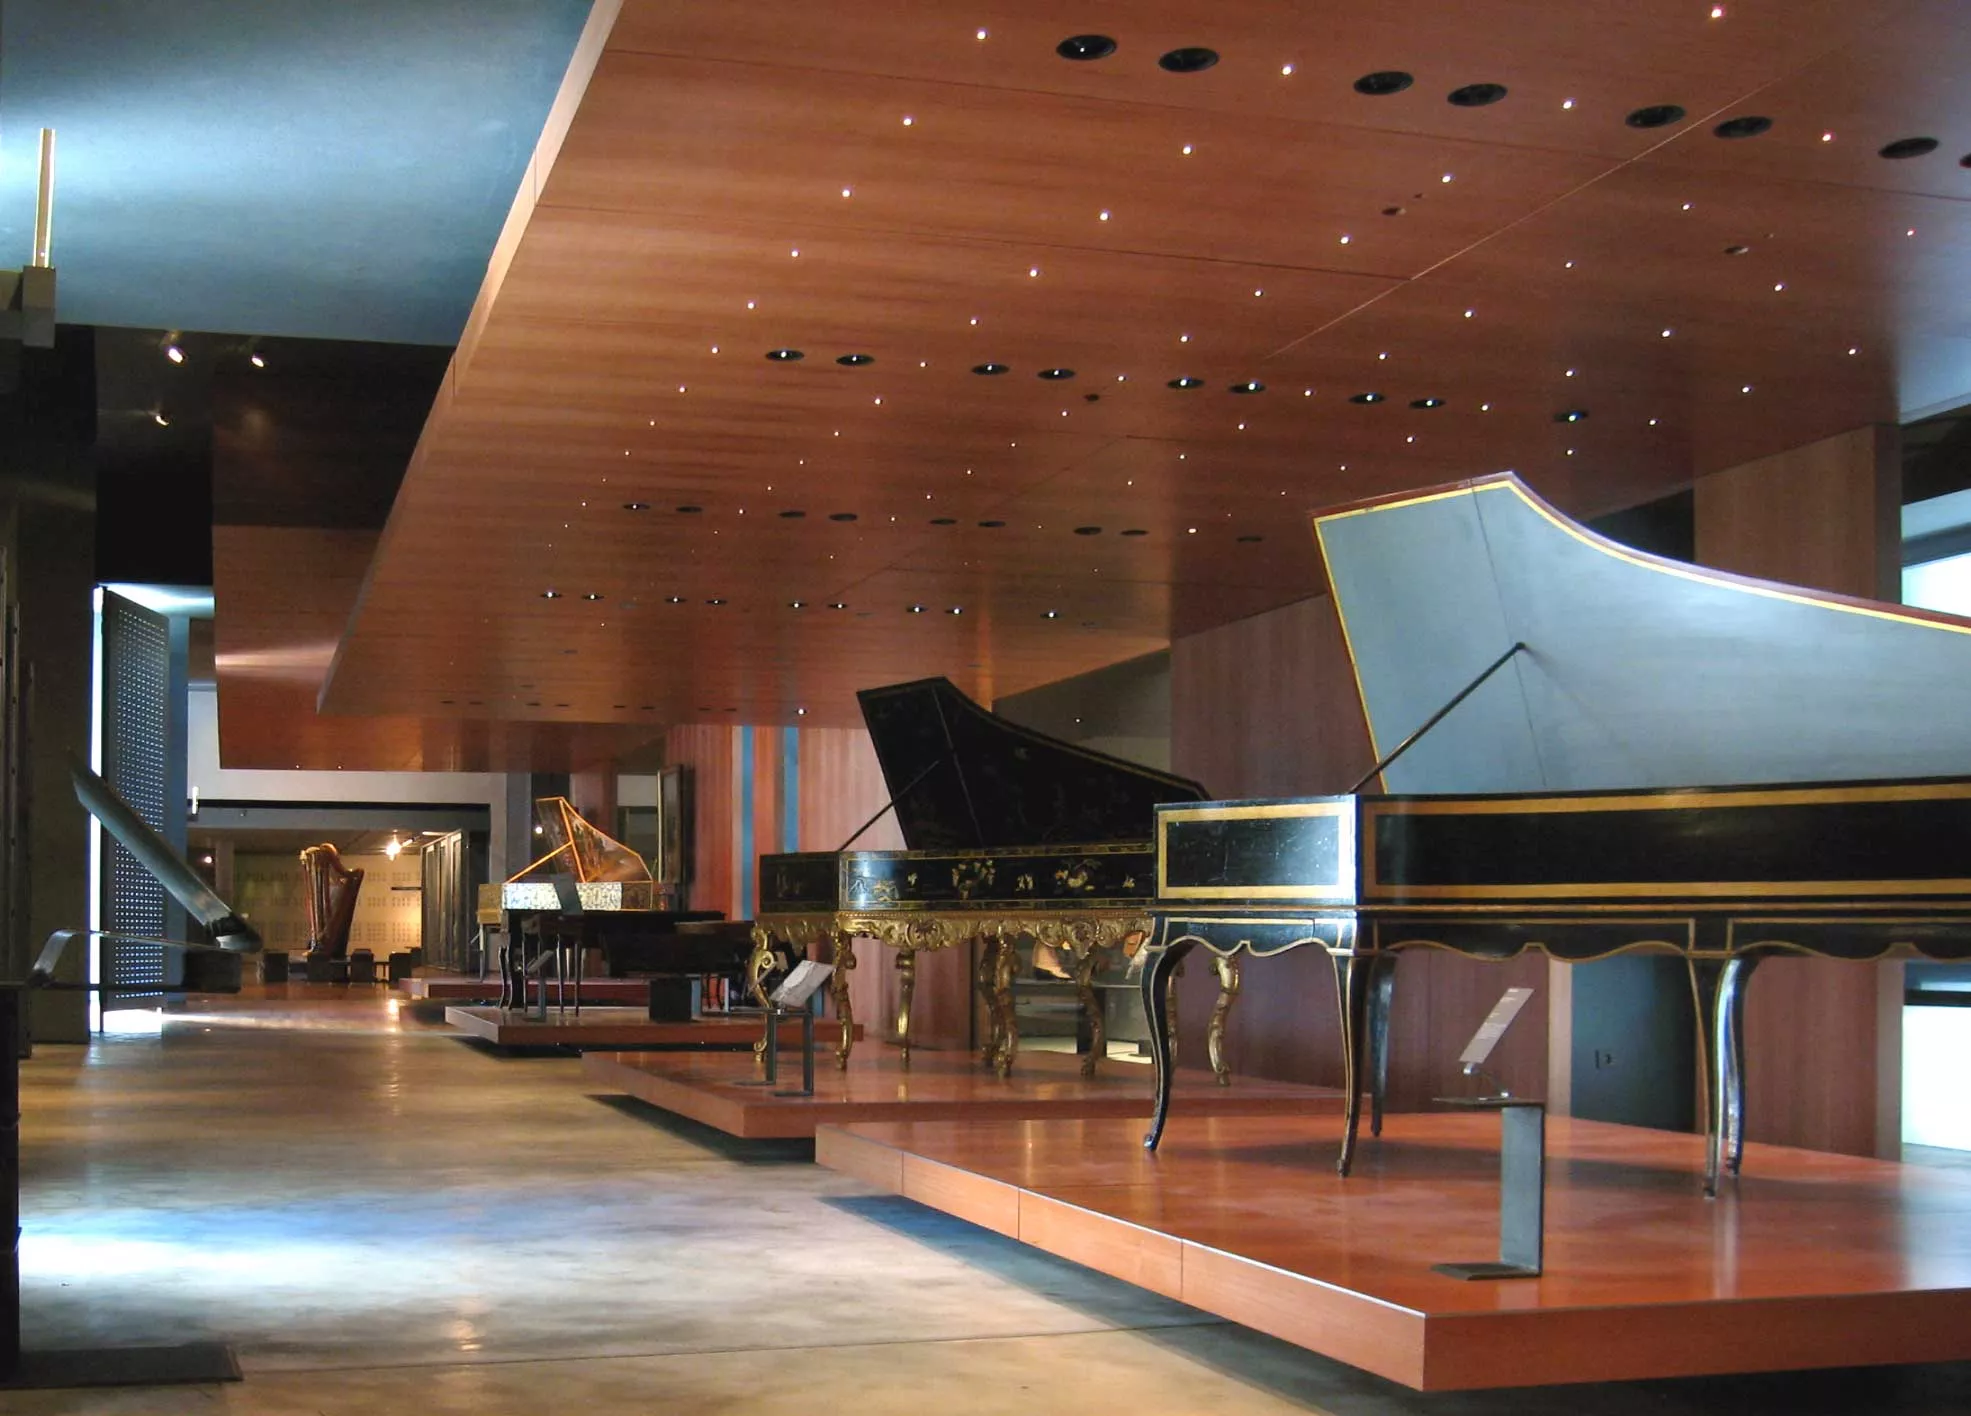 Music Museum in France, Europe | Museums - Rated 3.8